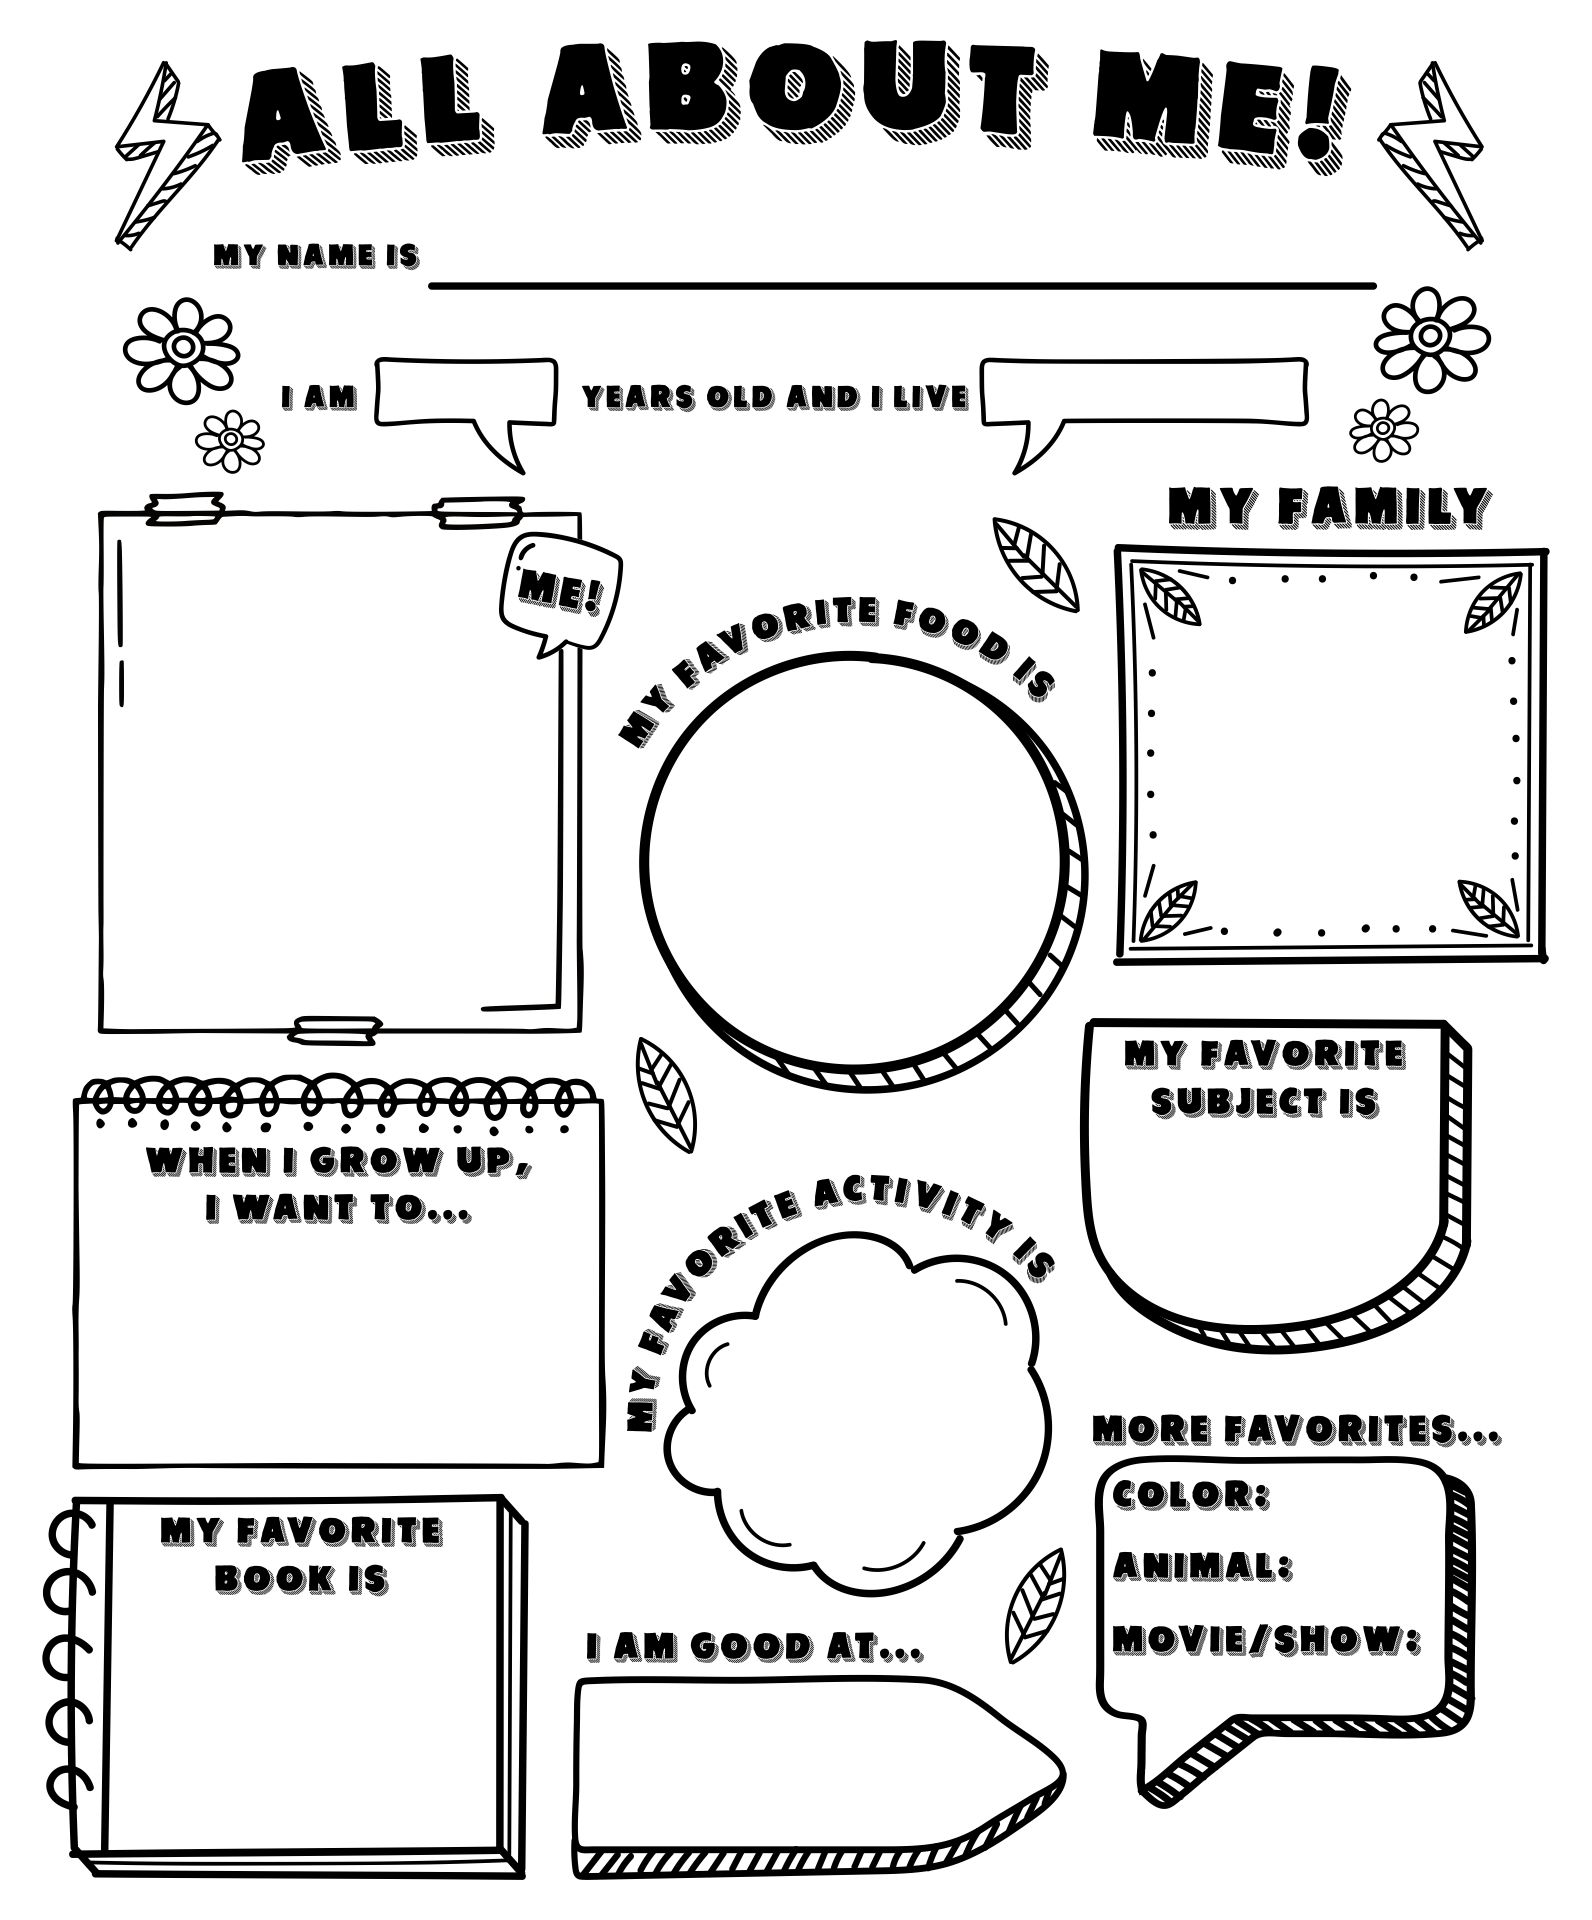 Preschool All About Me Graphic Organizer Printable For First Day Of School